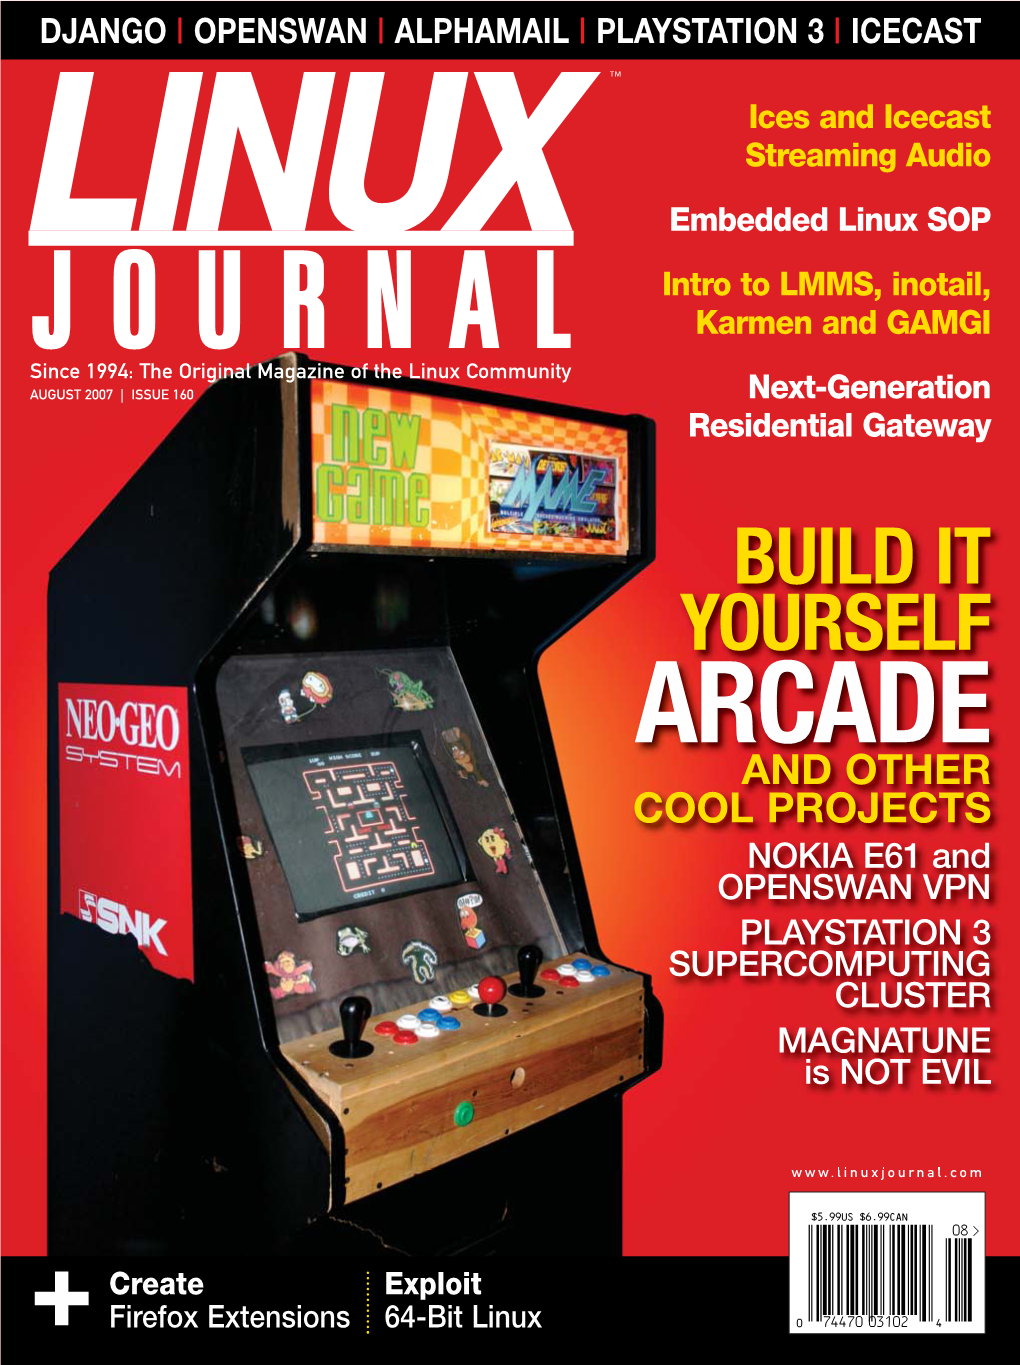 ARCADE and OTHER | Icecast COOL PROJECTS | Firefox NOKIA E61 and OPENSWAN VPN | 64-Bit Linux PLAYSTATION 3 SUPERCOMPUTING CLUSTER MAGNATUNE Is NOT EVIL AUGUST